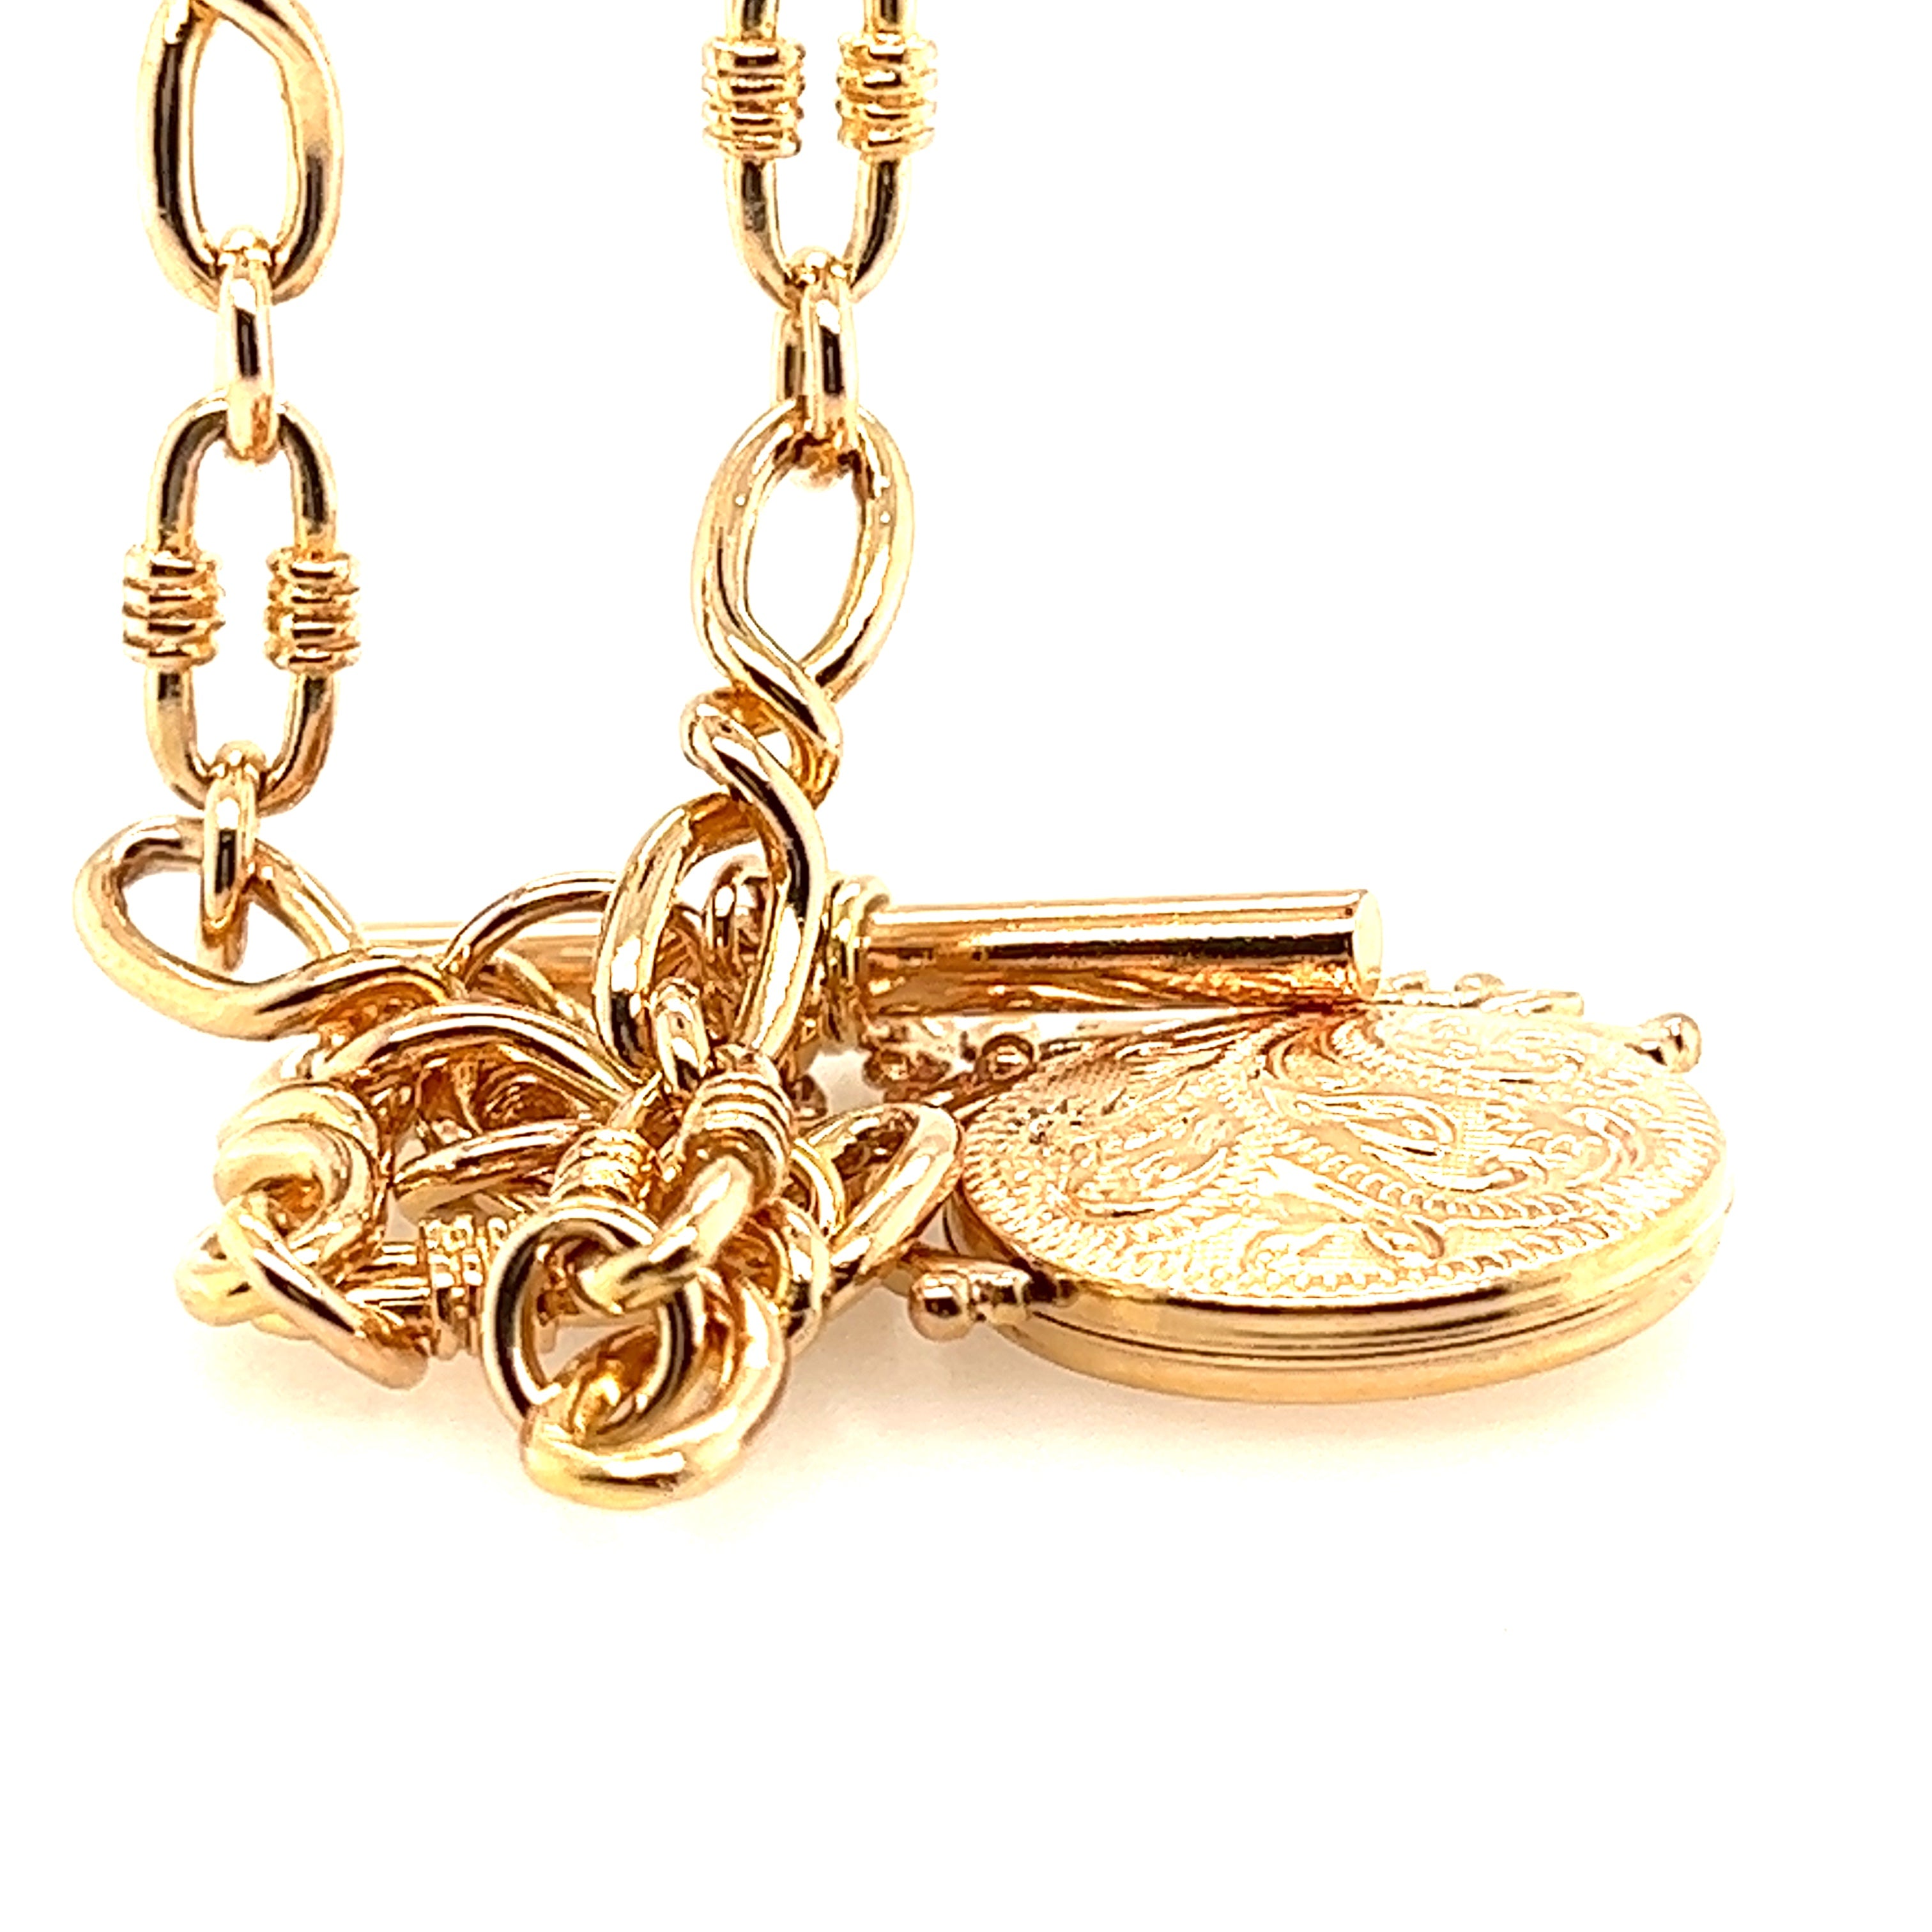 Gold Fancy Link Chain with Fob Bar and Spinner Pendant